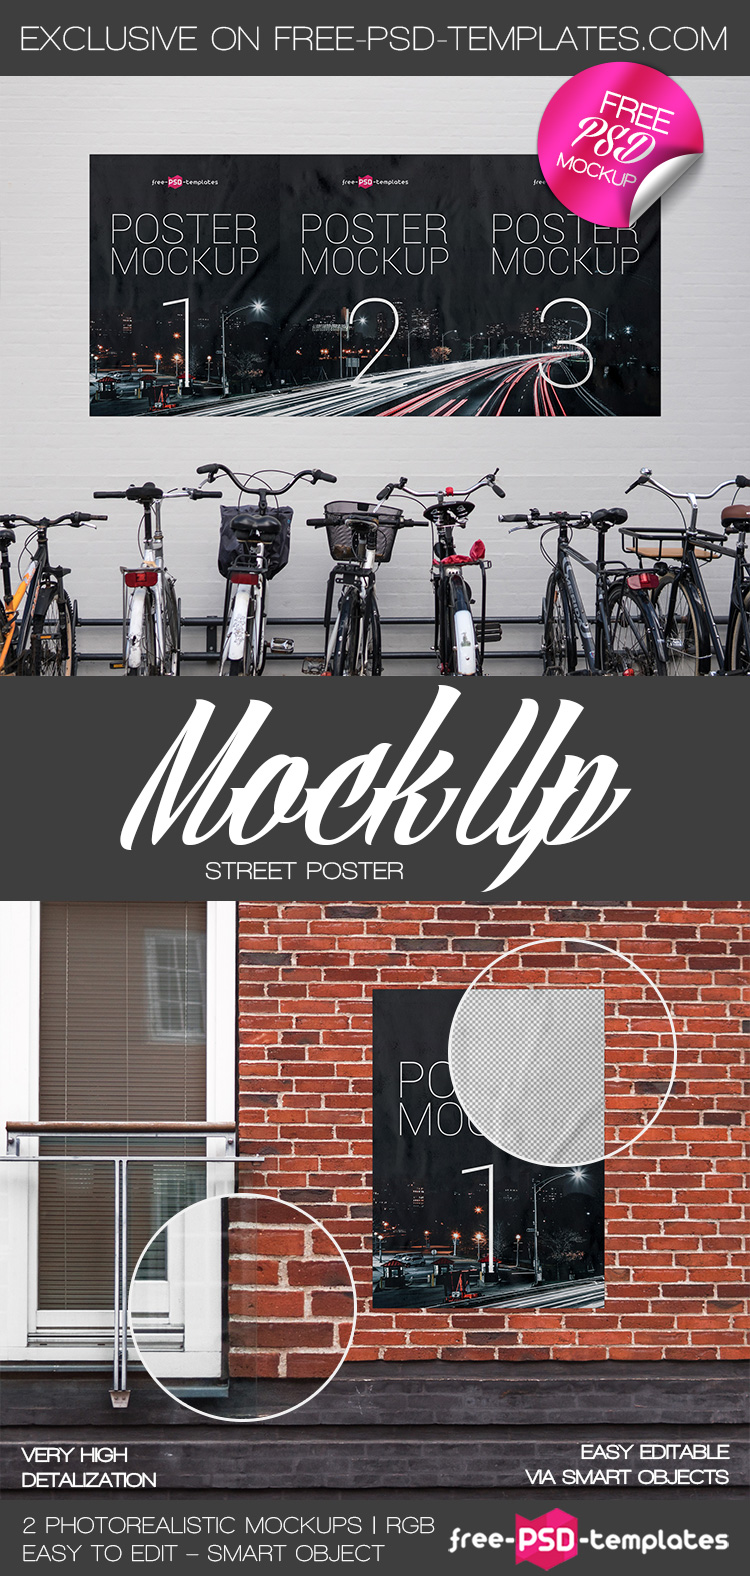 Download 2 Free Street Poster Mock-ups in PSD | Free PSD Templates PSD Mockup Templates